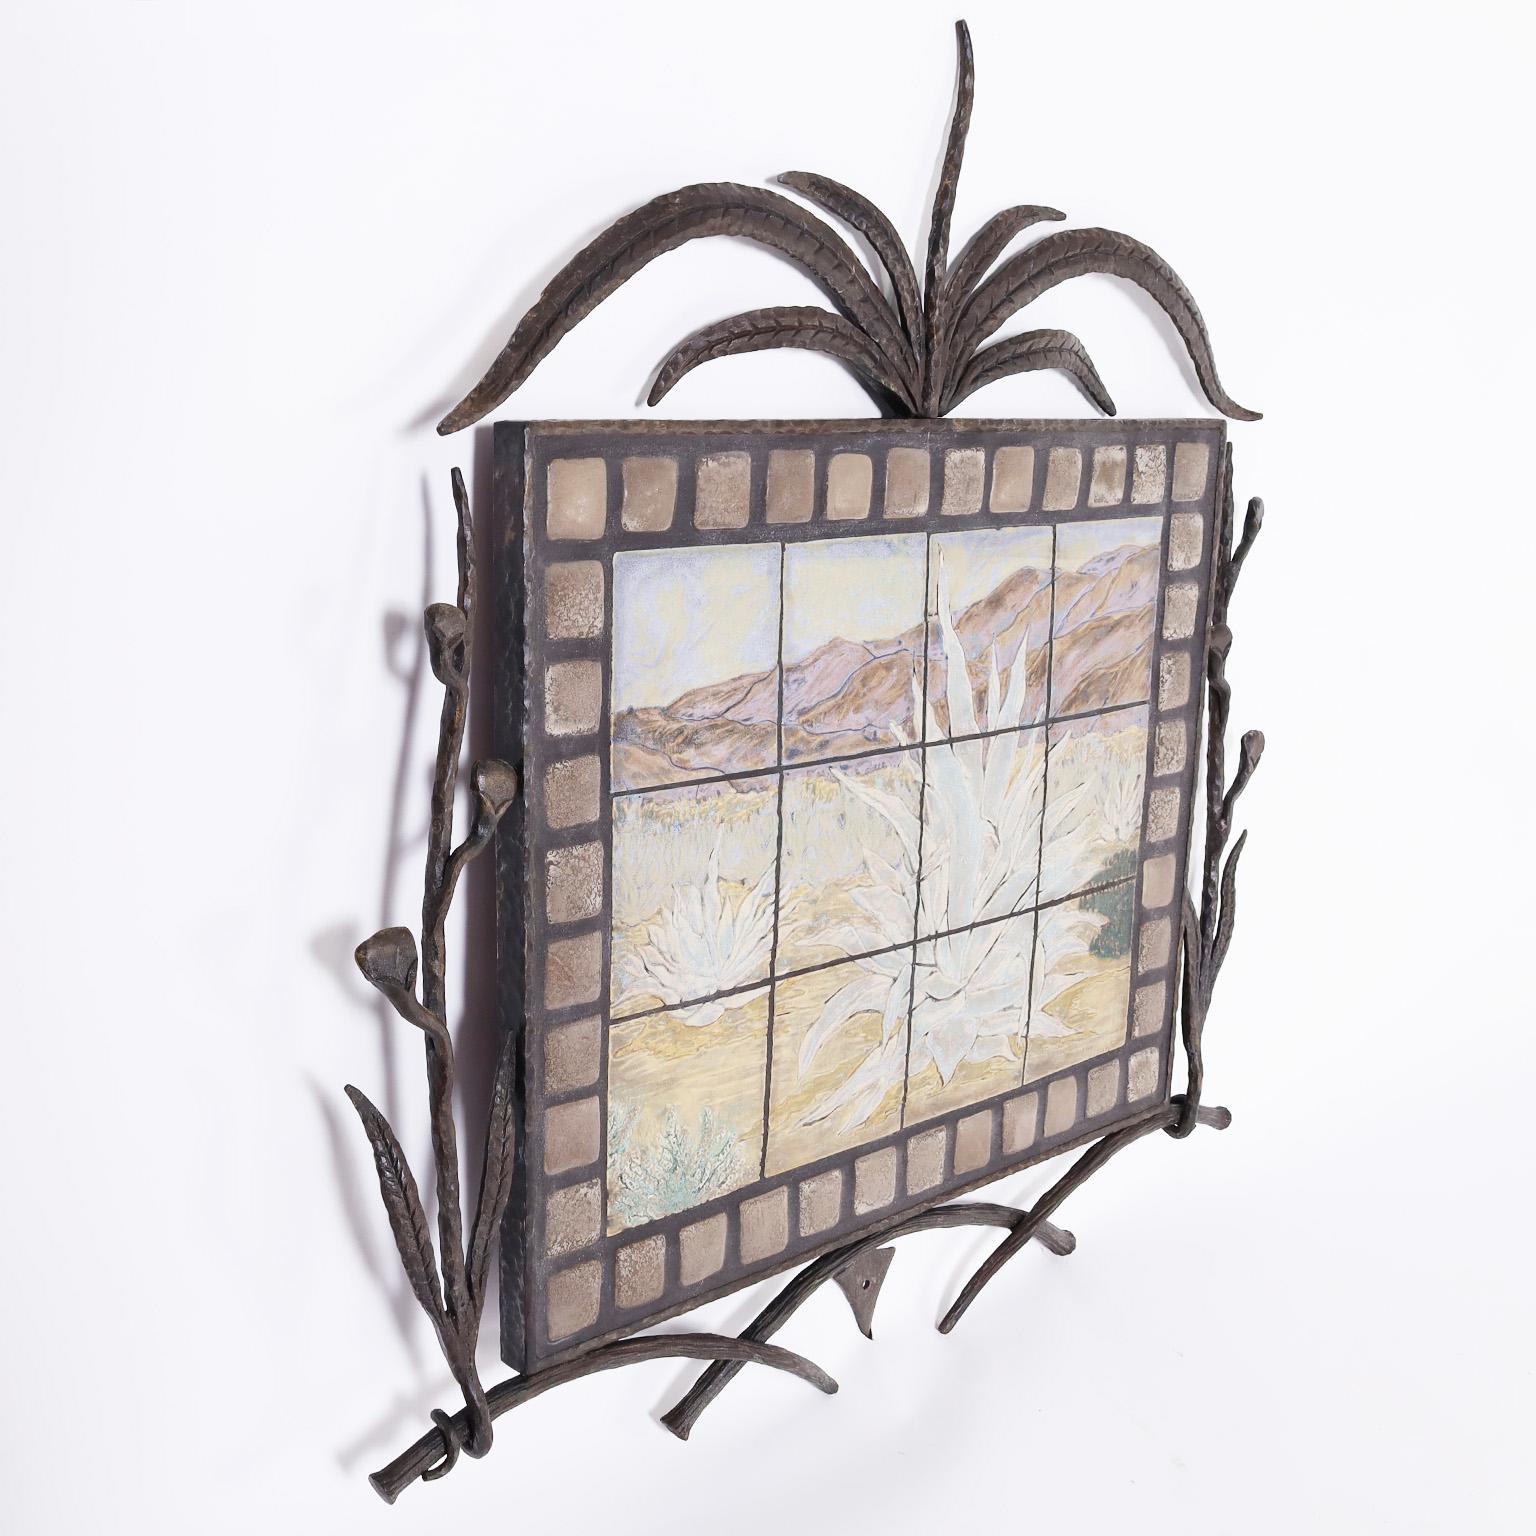 Tile Plaque with Iron Frame - Other Art Style Art by Unknown